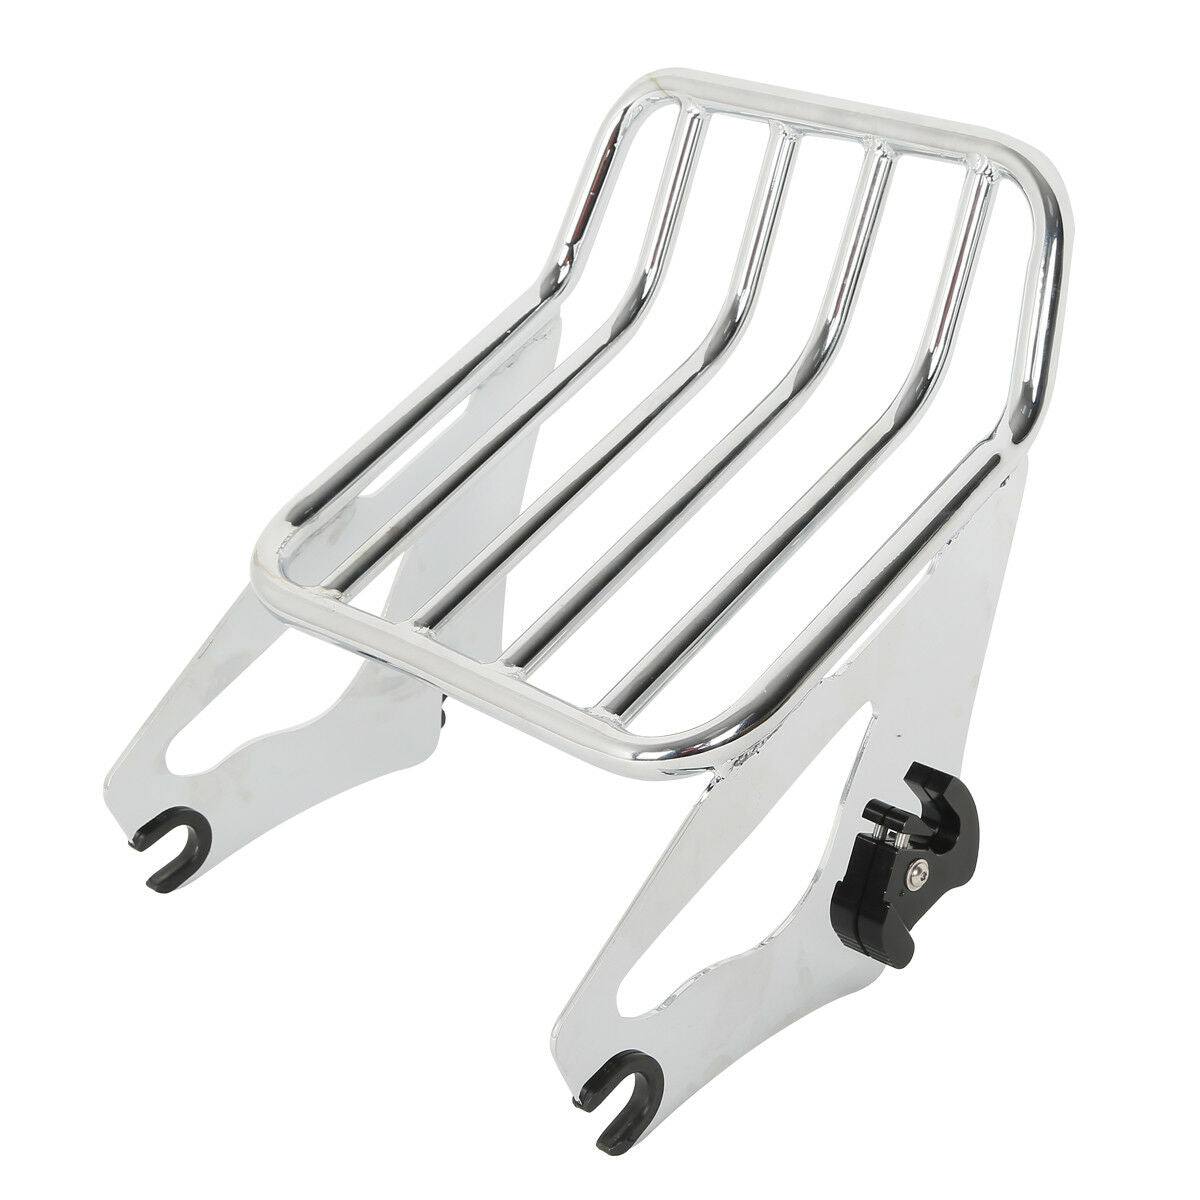 Two Up Luggage Rack Rail Fit For Harley Tour Pak Touring Road Glide 2009-2021 18 - Moto Life Products